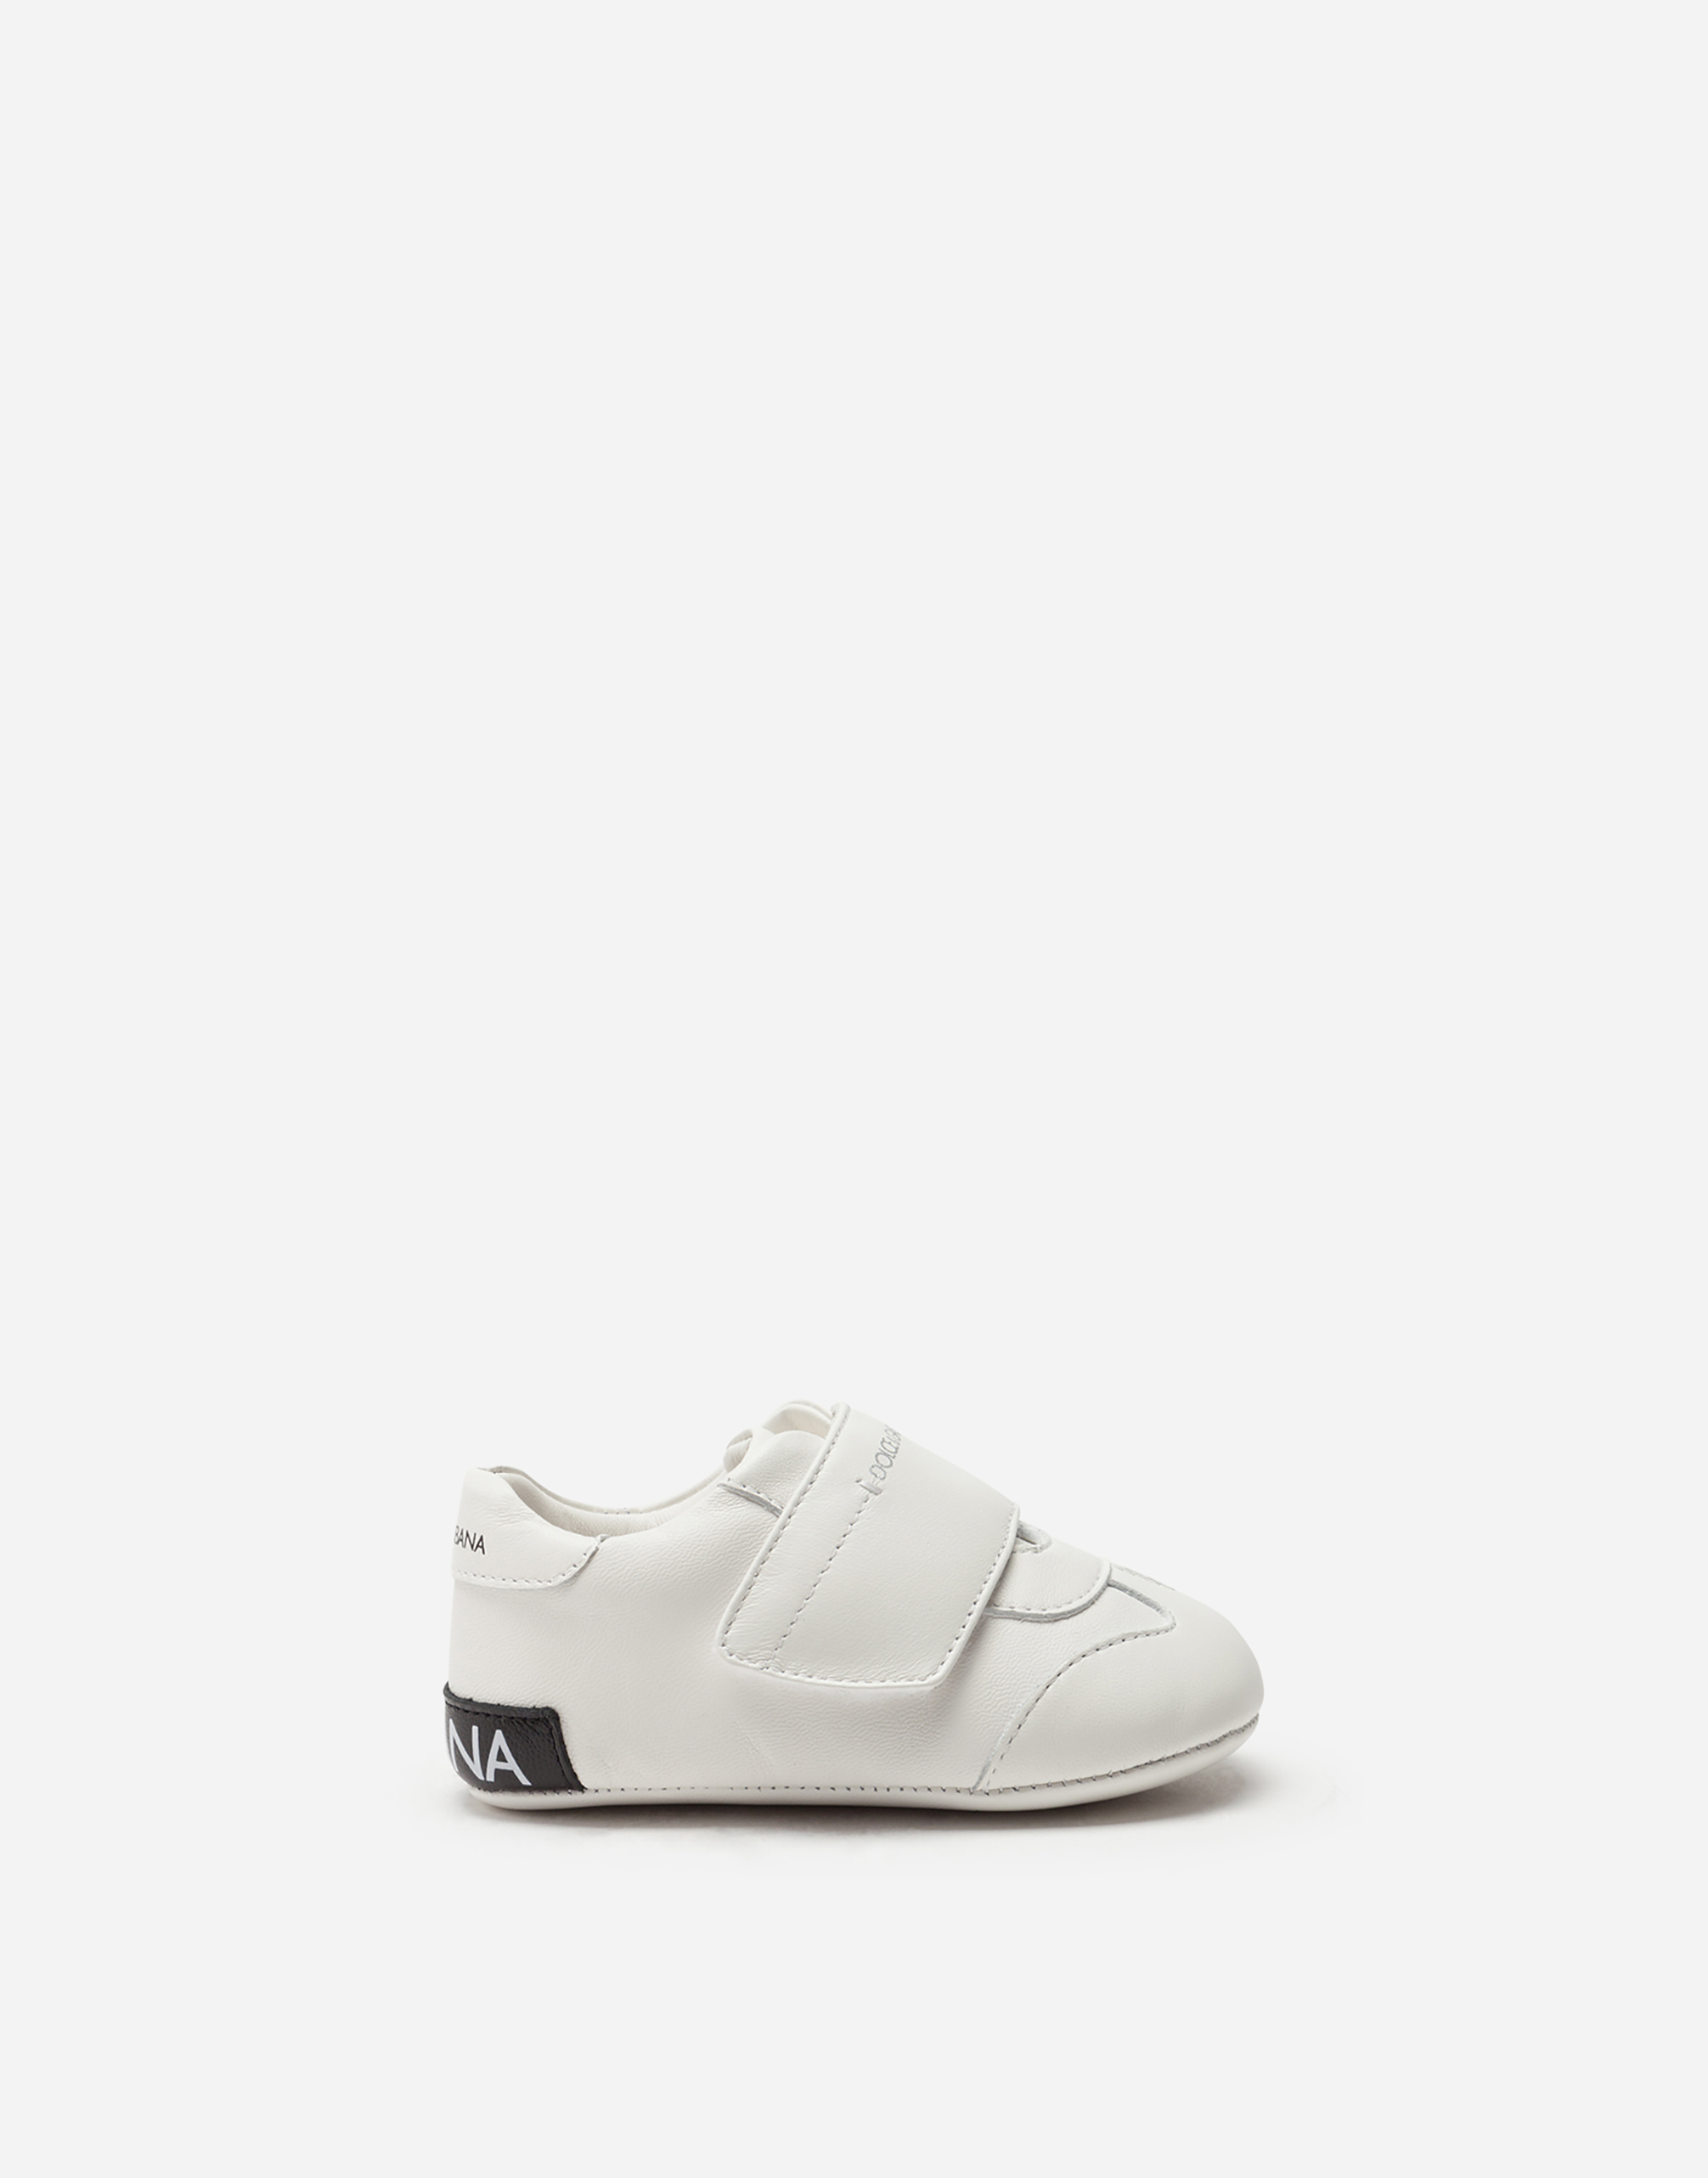 Nappa leather sneakers with heat-stamped logo in White/Silver